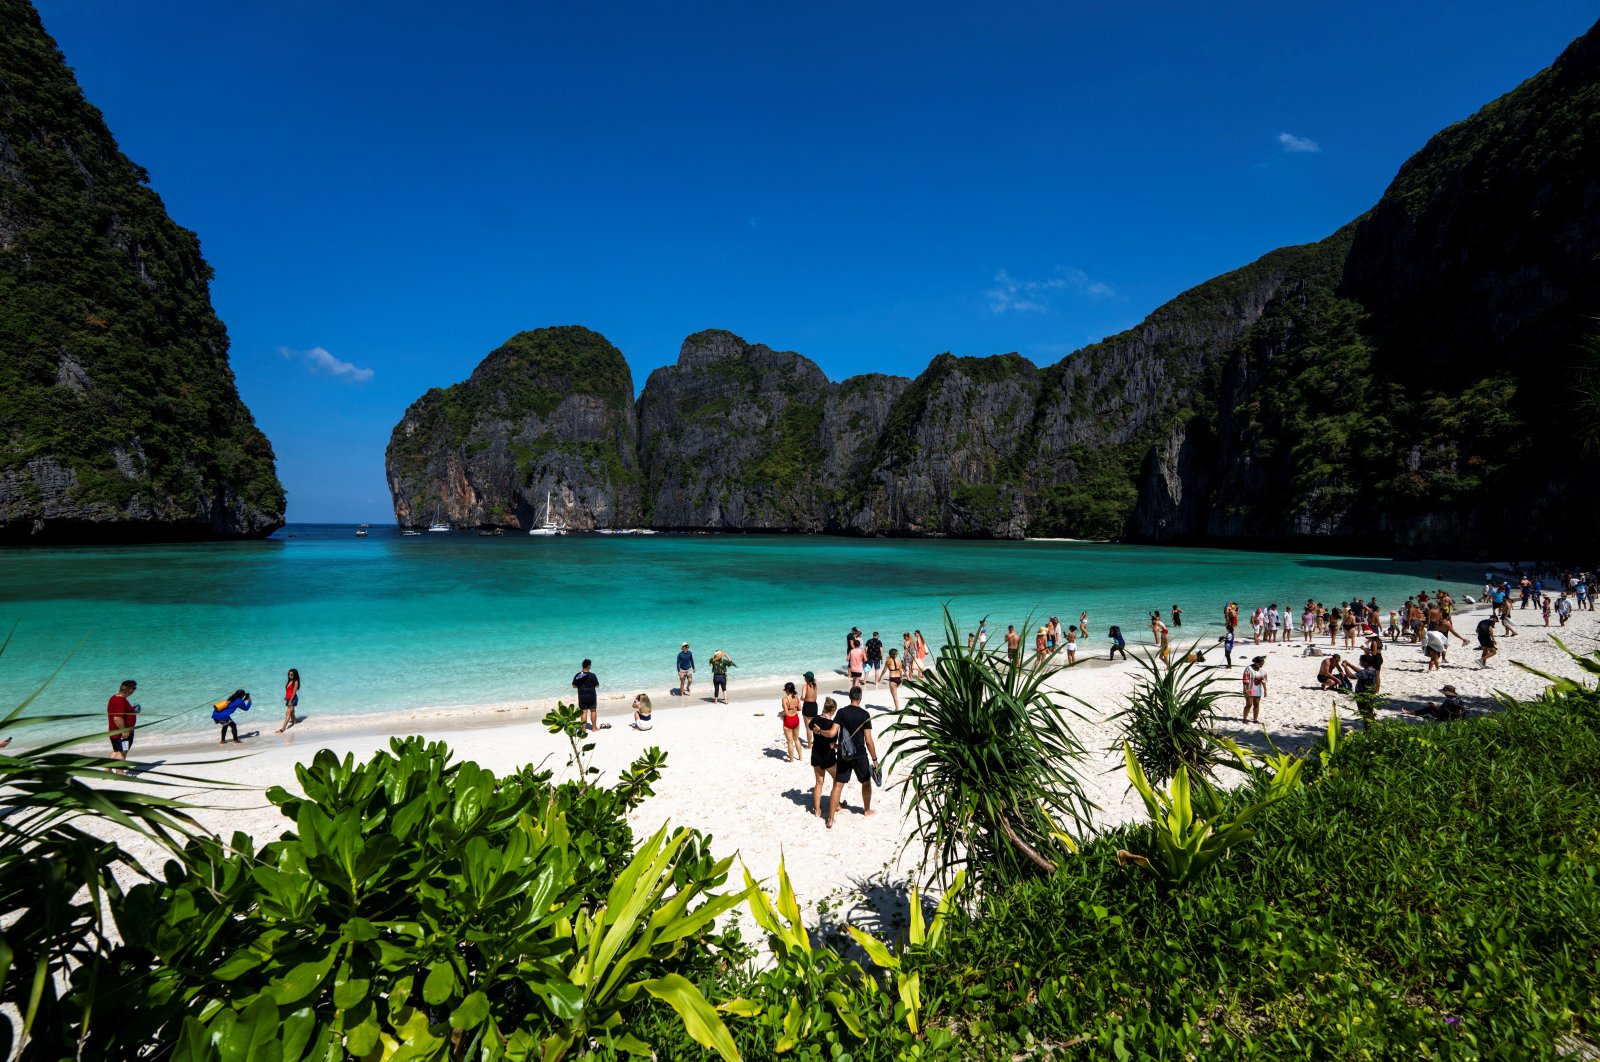 Tourists visit Maya bay after Thailand reopened its world-famous beach after closing it for more than three years to allow its ecosystem to recover from the impact of overtourism, Krabi province, Thailand, Jan. 3, 2022. (Reuters Photo)